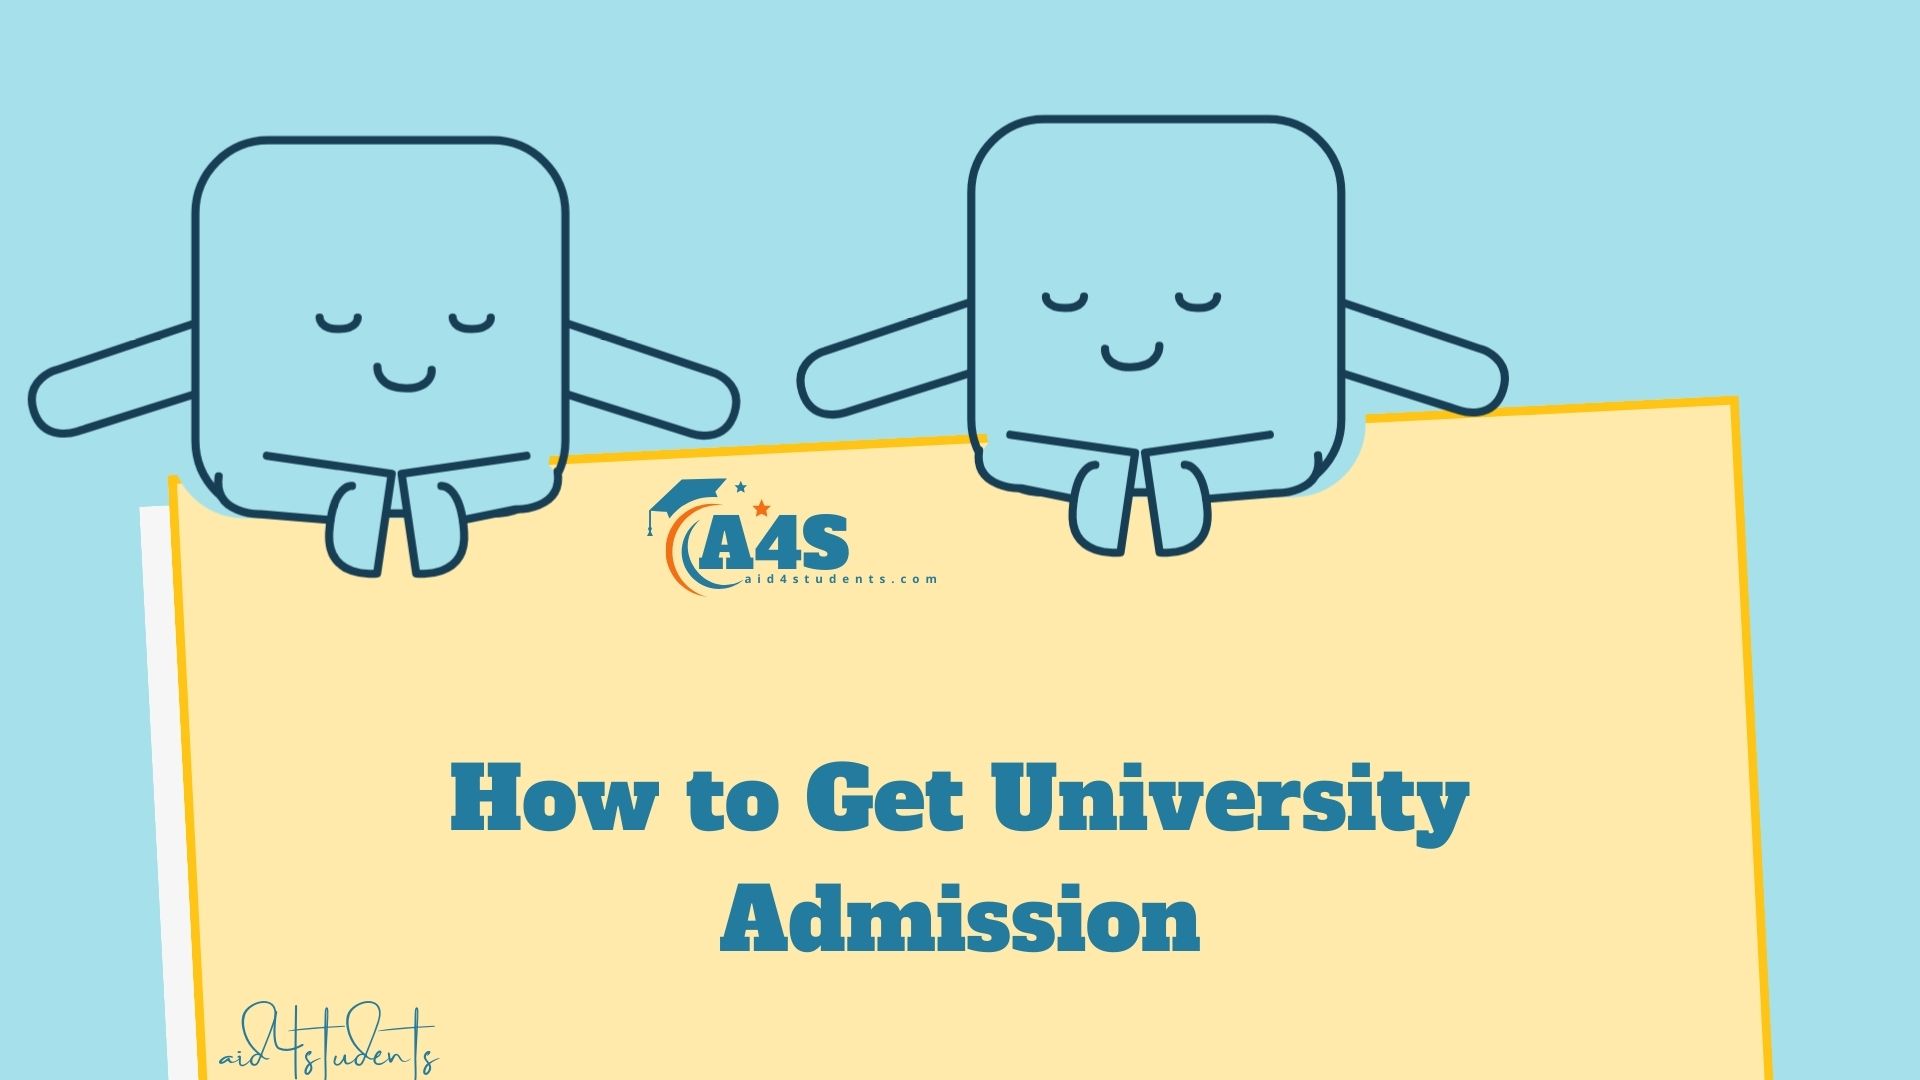 How to Get University Admission